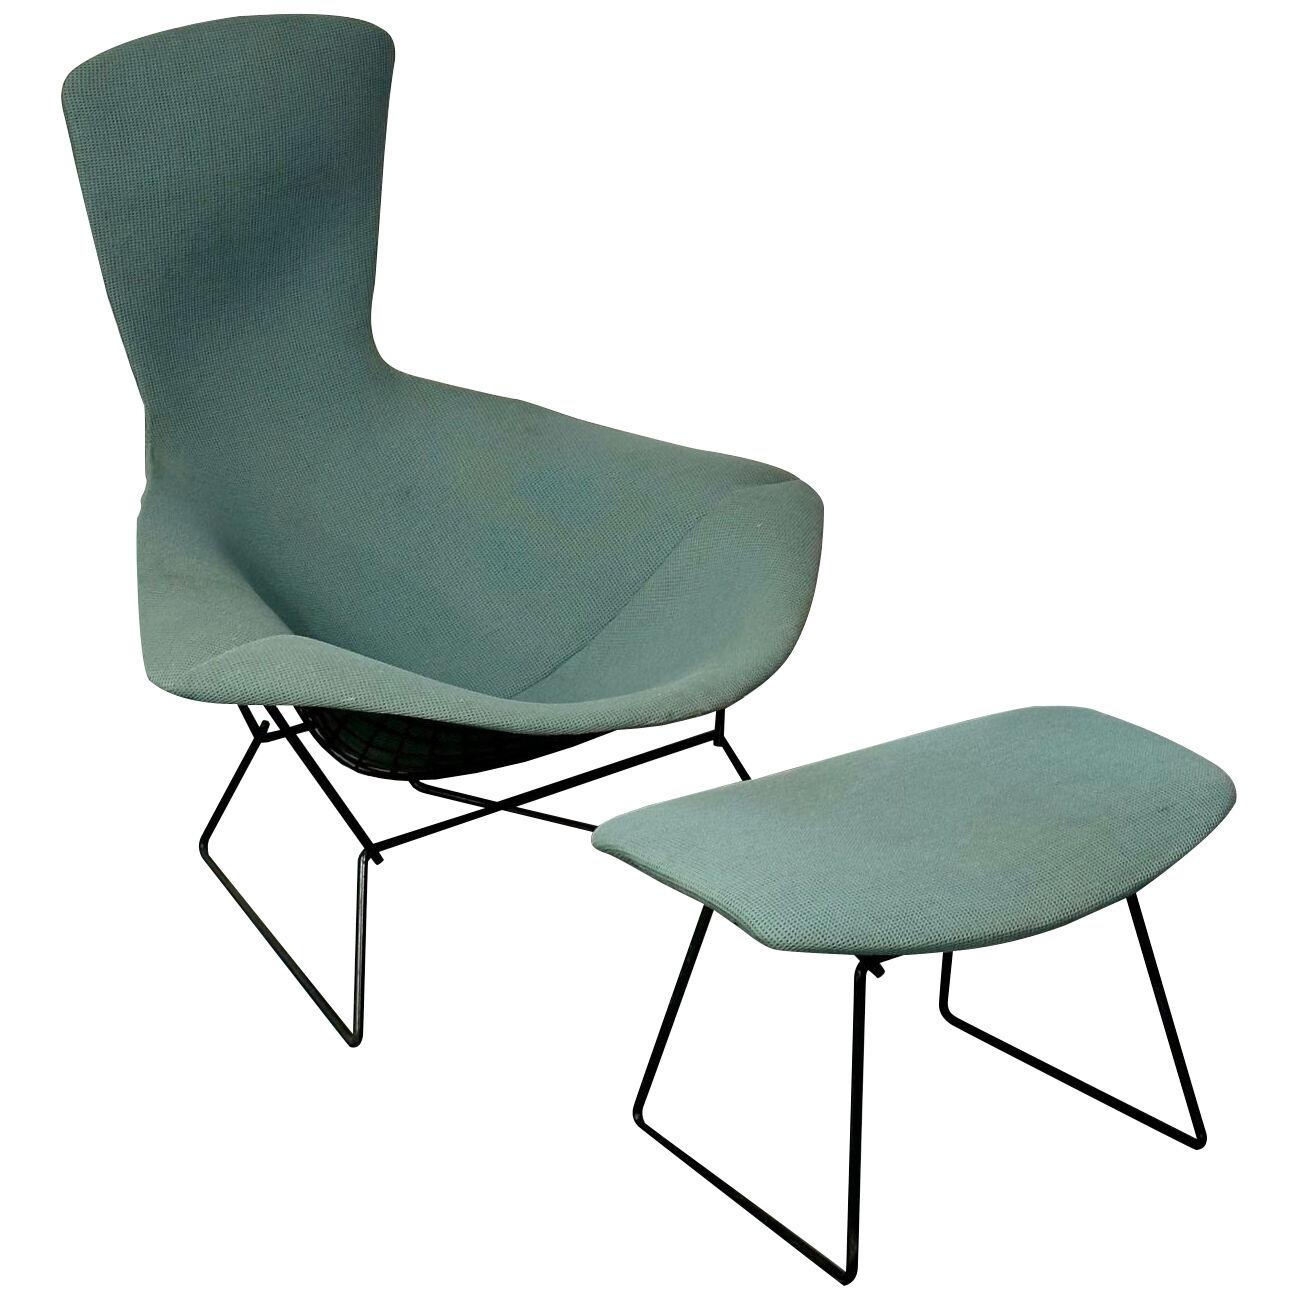 Vintage Harry Bertoia for Knoll Bird Lounge Chair with Ottoman, Labeled, 1960s